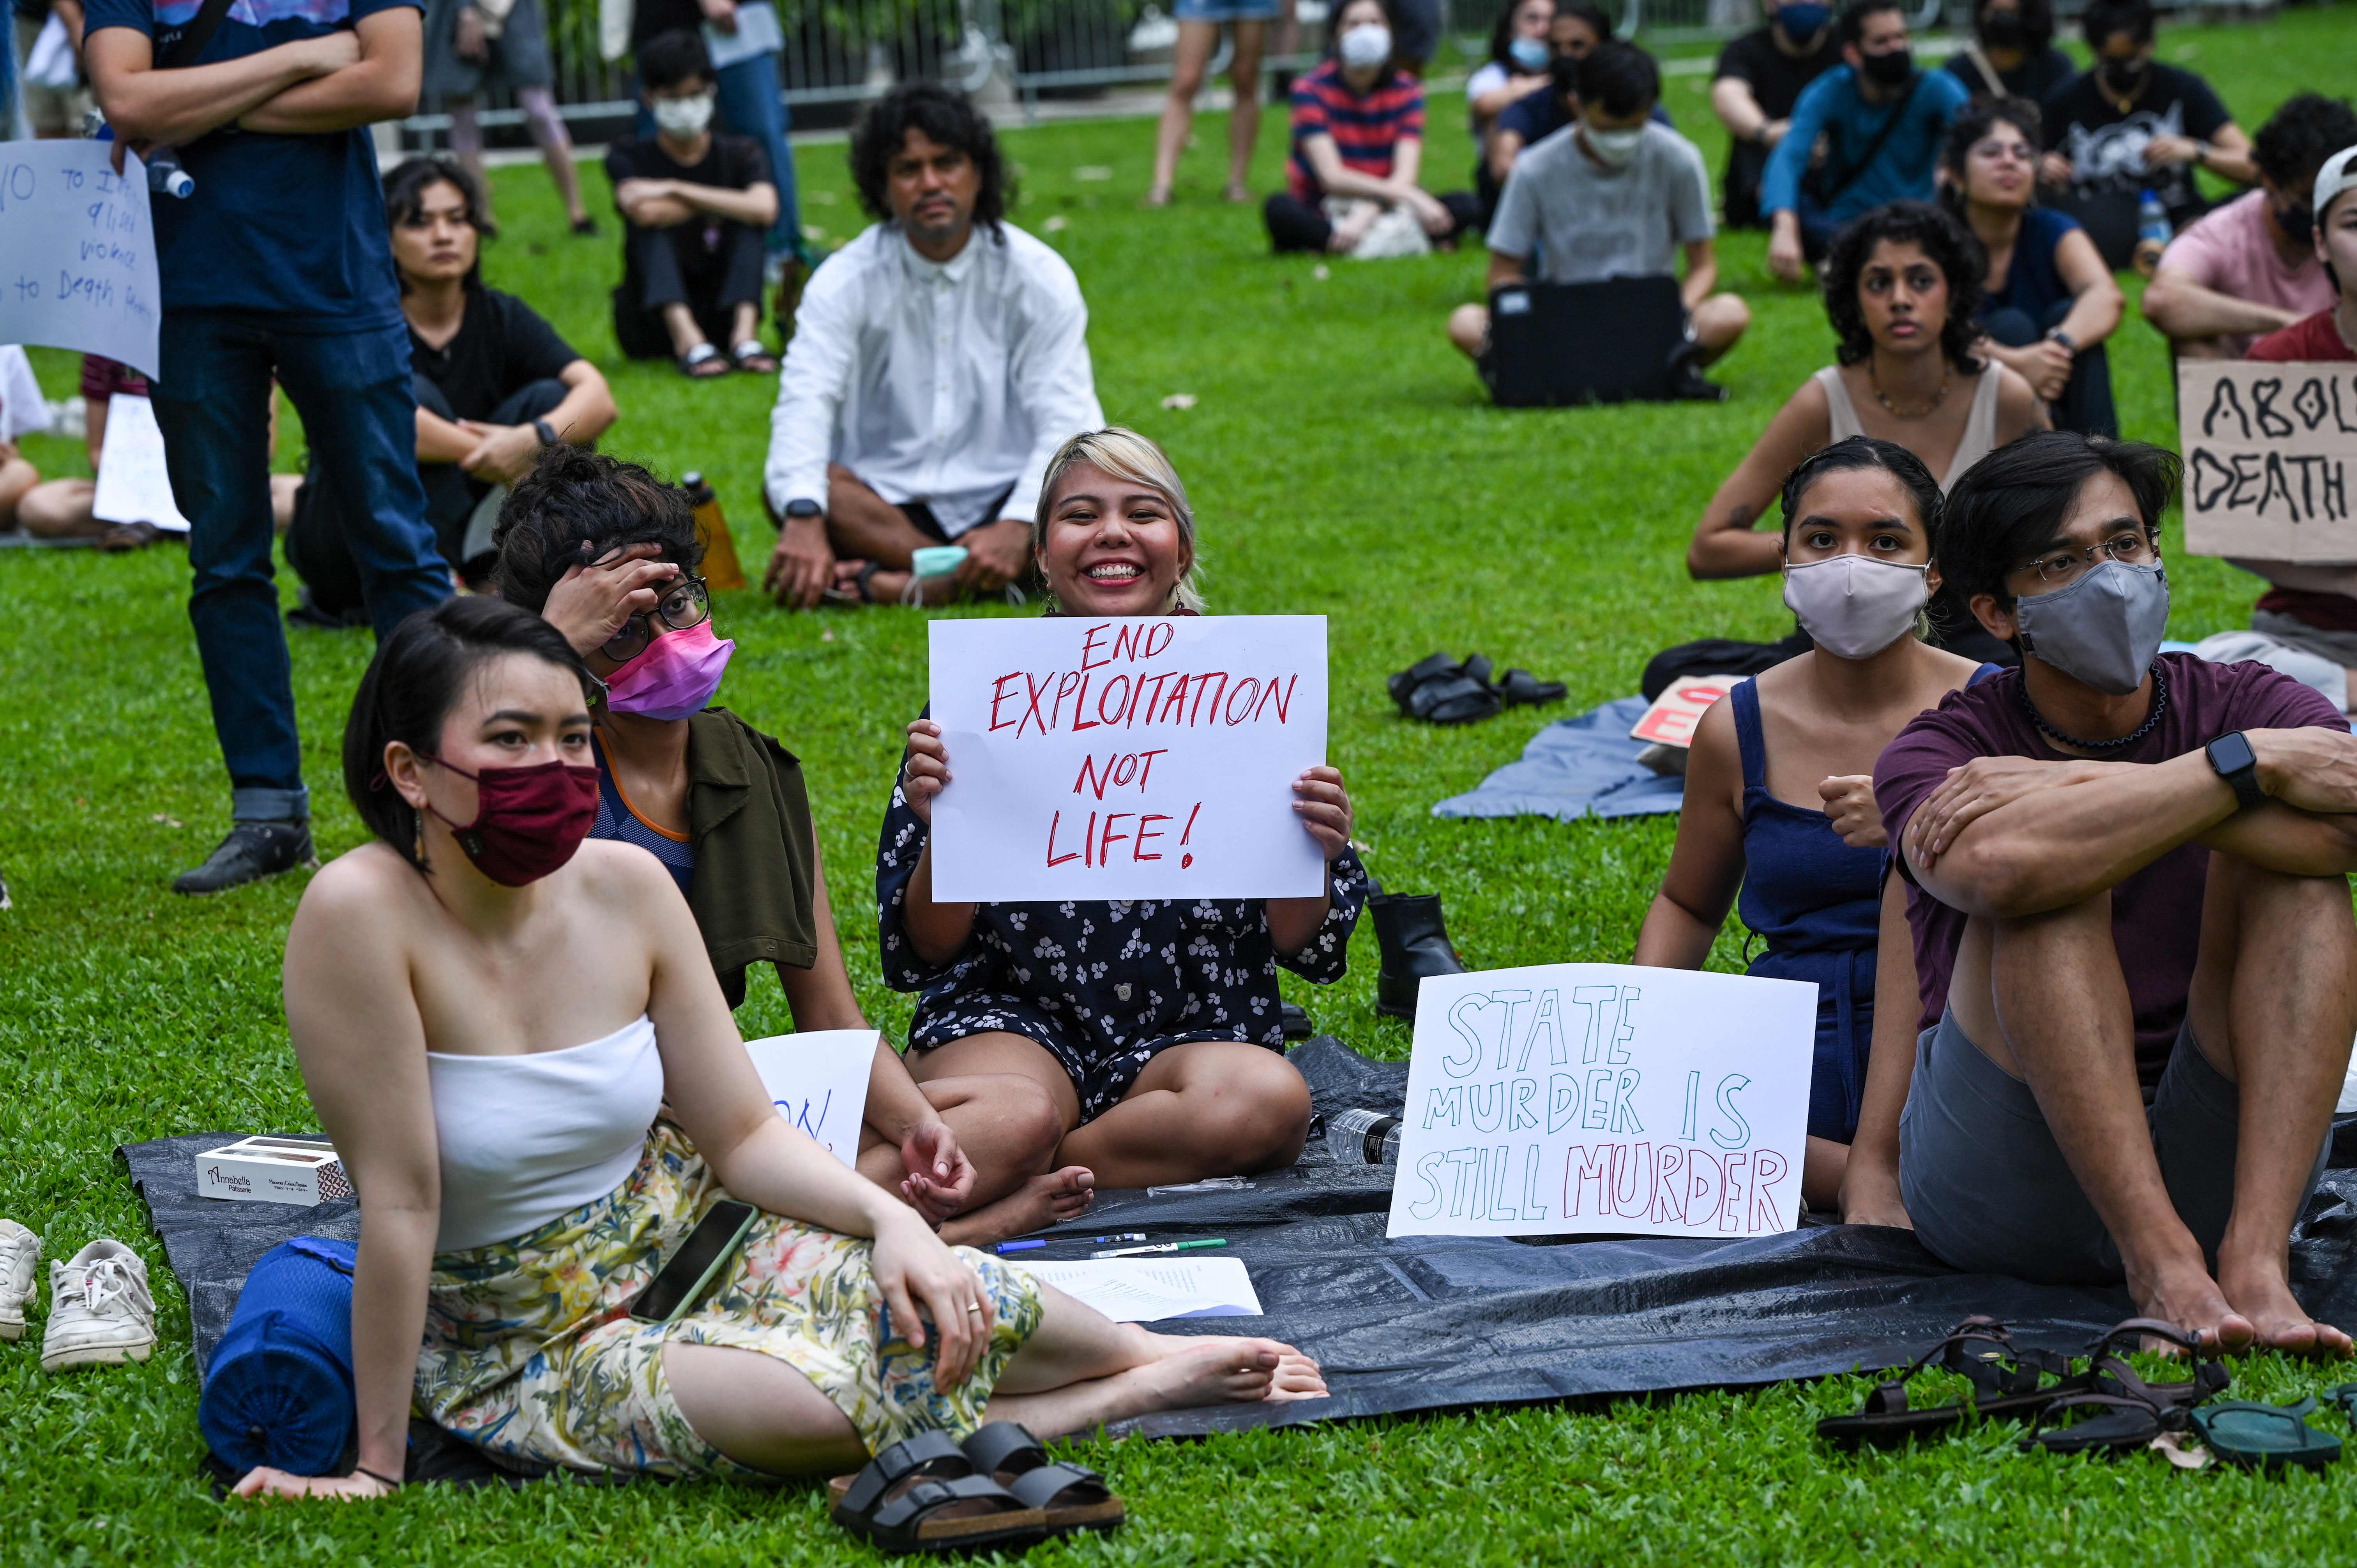 Attendees hold signs during a protest against the death penalty at Speakers' Corner in Singapore on 3 April